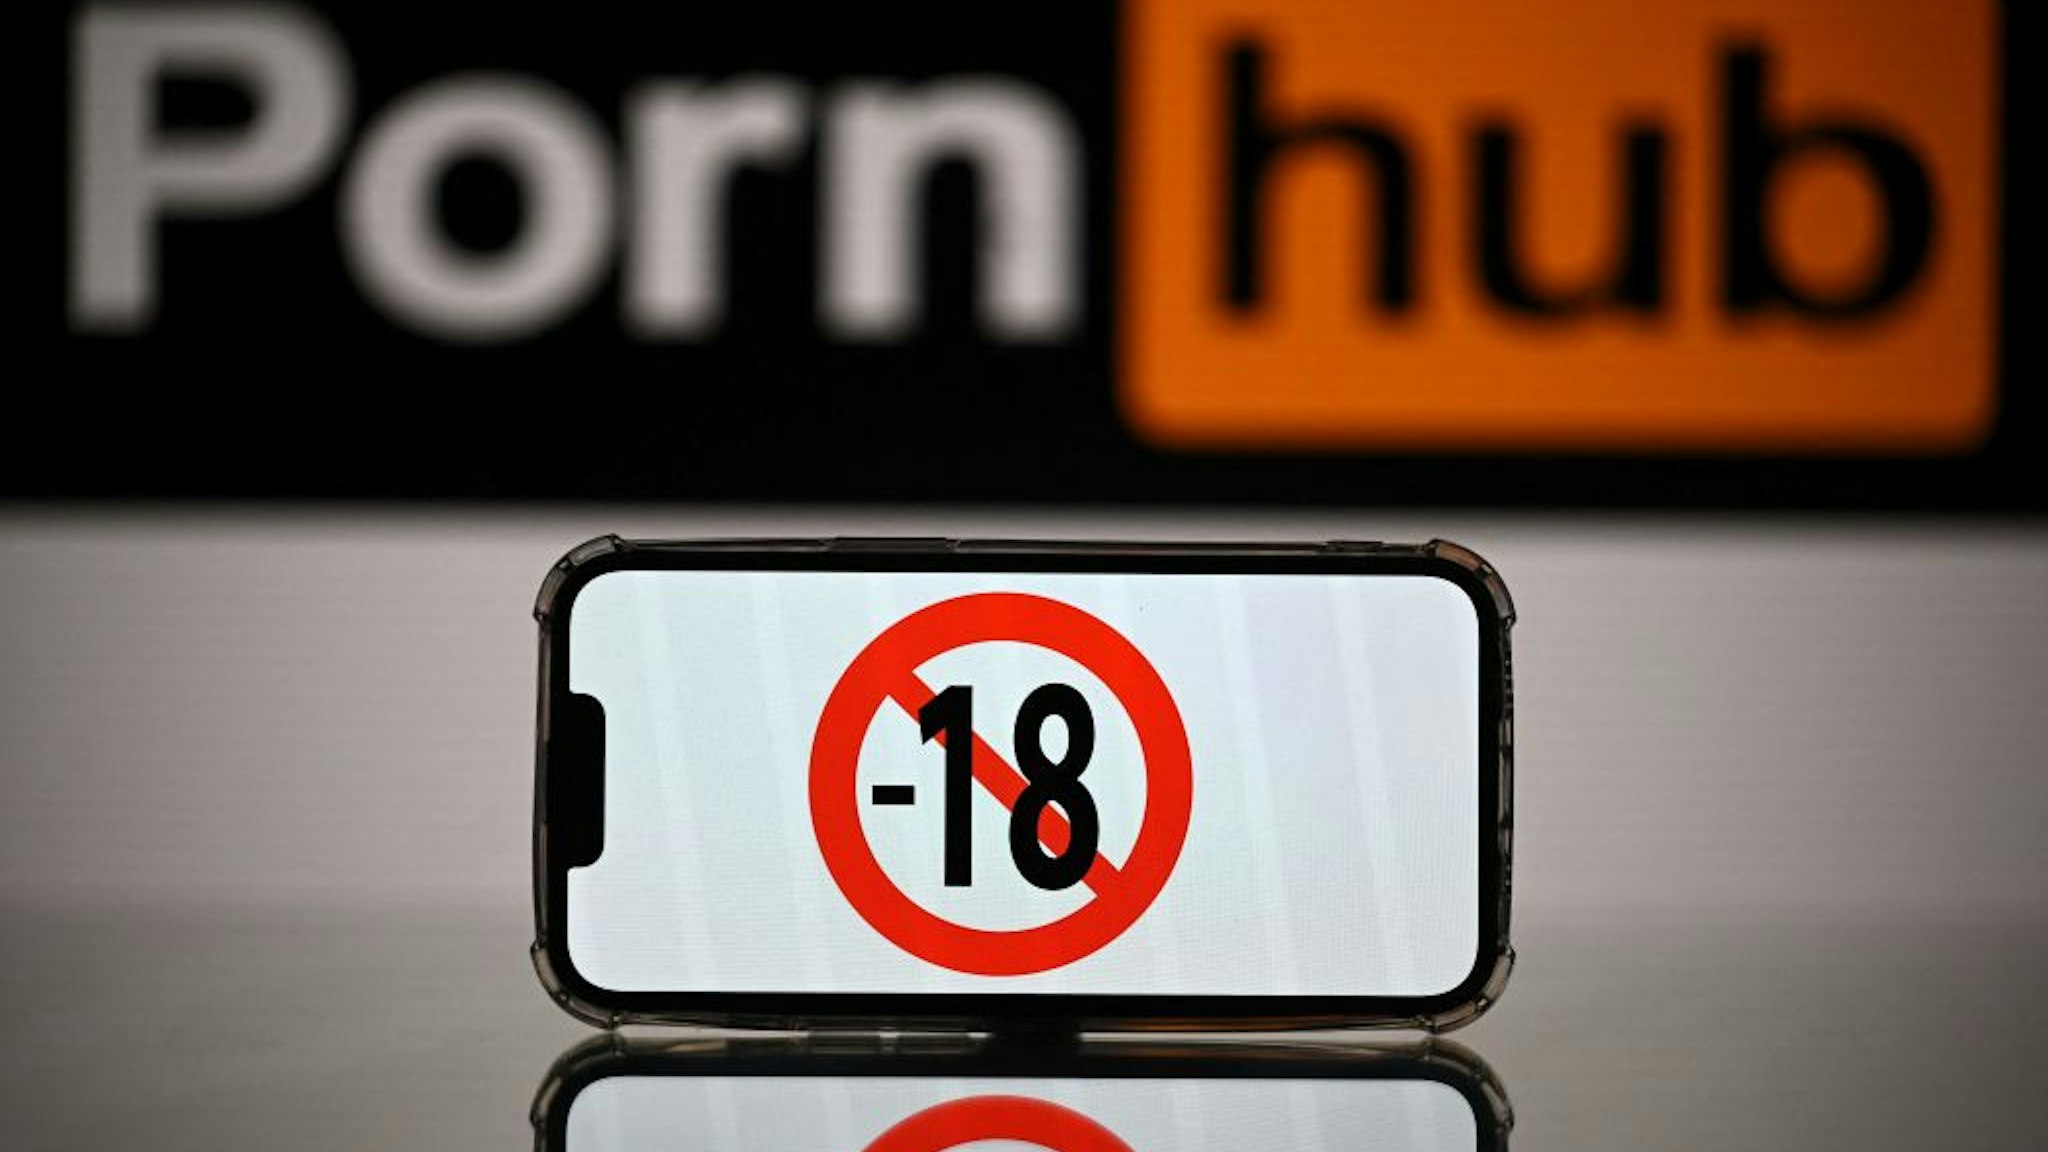 This photograph taken on May 24, 2022 in Toulouse shows screens displaying a minor child sign and the logo of the pornographic site Pornhub. - The judicial examination of Arcom request against porn sites has been postponed to one month, on May 24, 2022. Arcom media regulator requests five pornographic sites to be blocked as they are not preventing the exposure of minors to their content, and French telecom operators to block access to the pornographic sites. (Photo by Lionel BONAVENTURE / AFP)